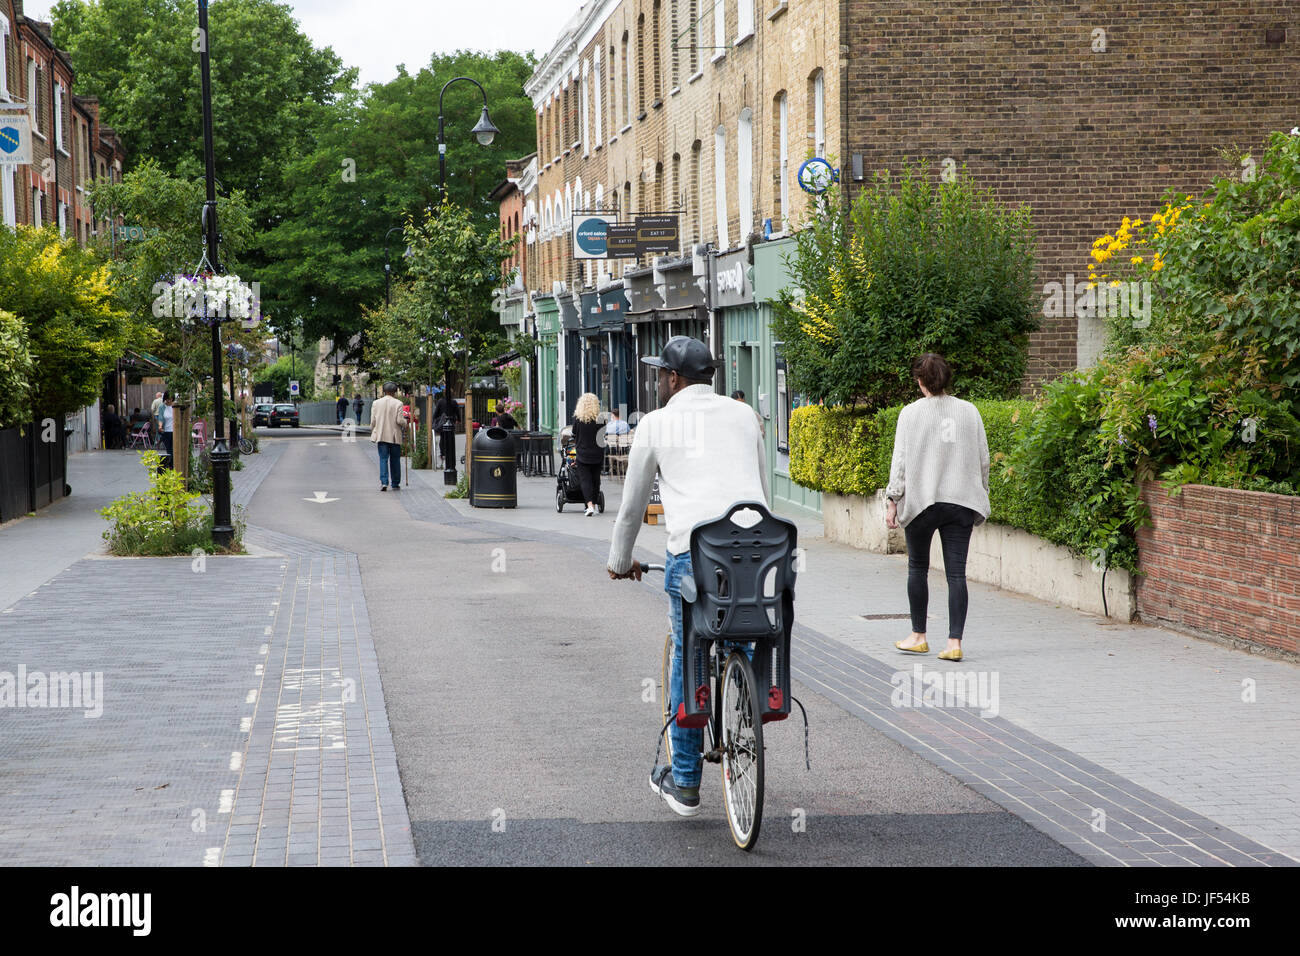 London, UK. 29th June, 2017. Orford Road in Walthamstow is now closed to traffic other than cyclists and local buses between 10am-10pm as part of the London Borough of Waltham Forest's Mini-Holland scheme and Enjoy Waltham Forest programme. Credit: Mark Kerrison/Alamy Live News Stock Photo